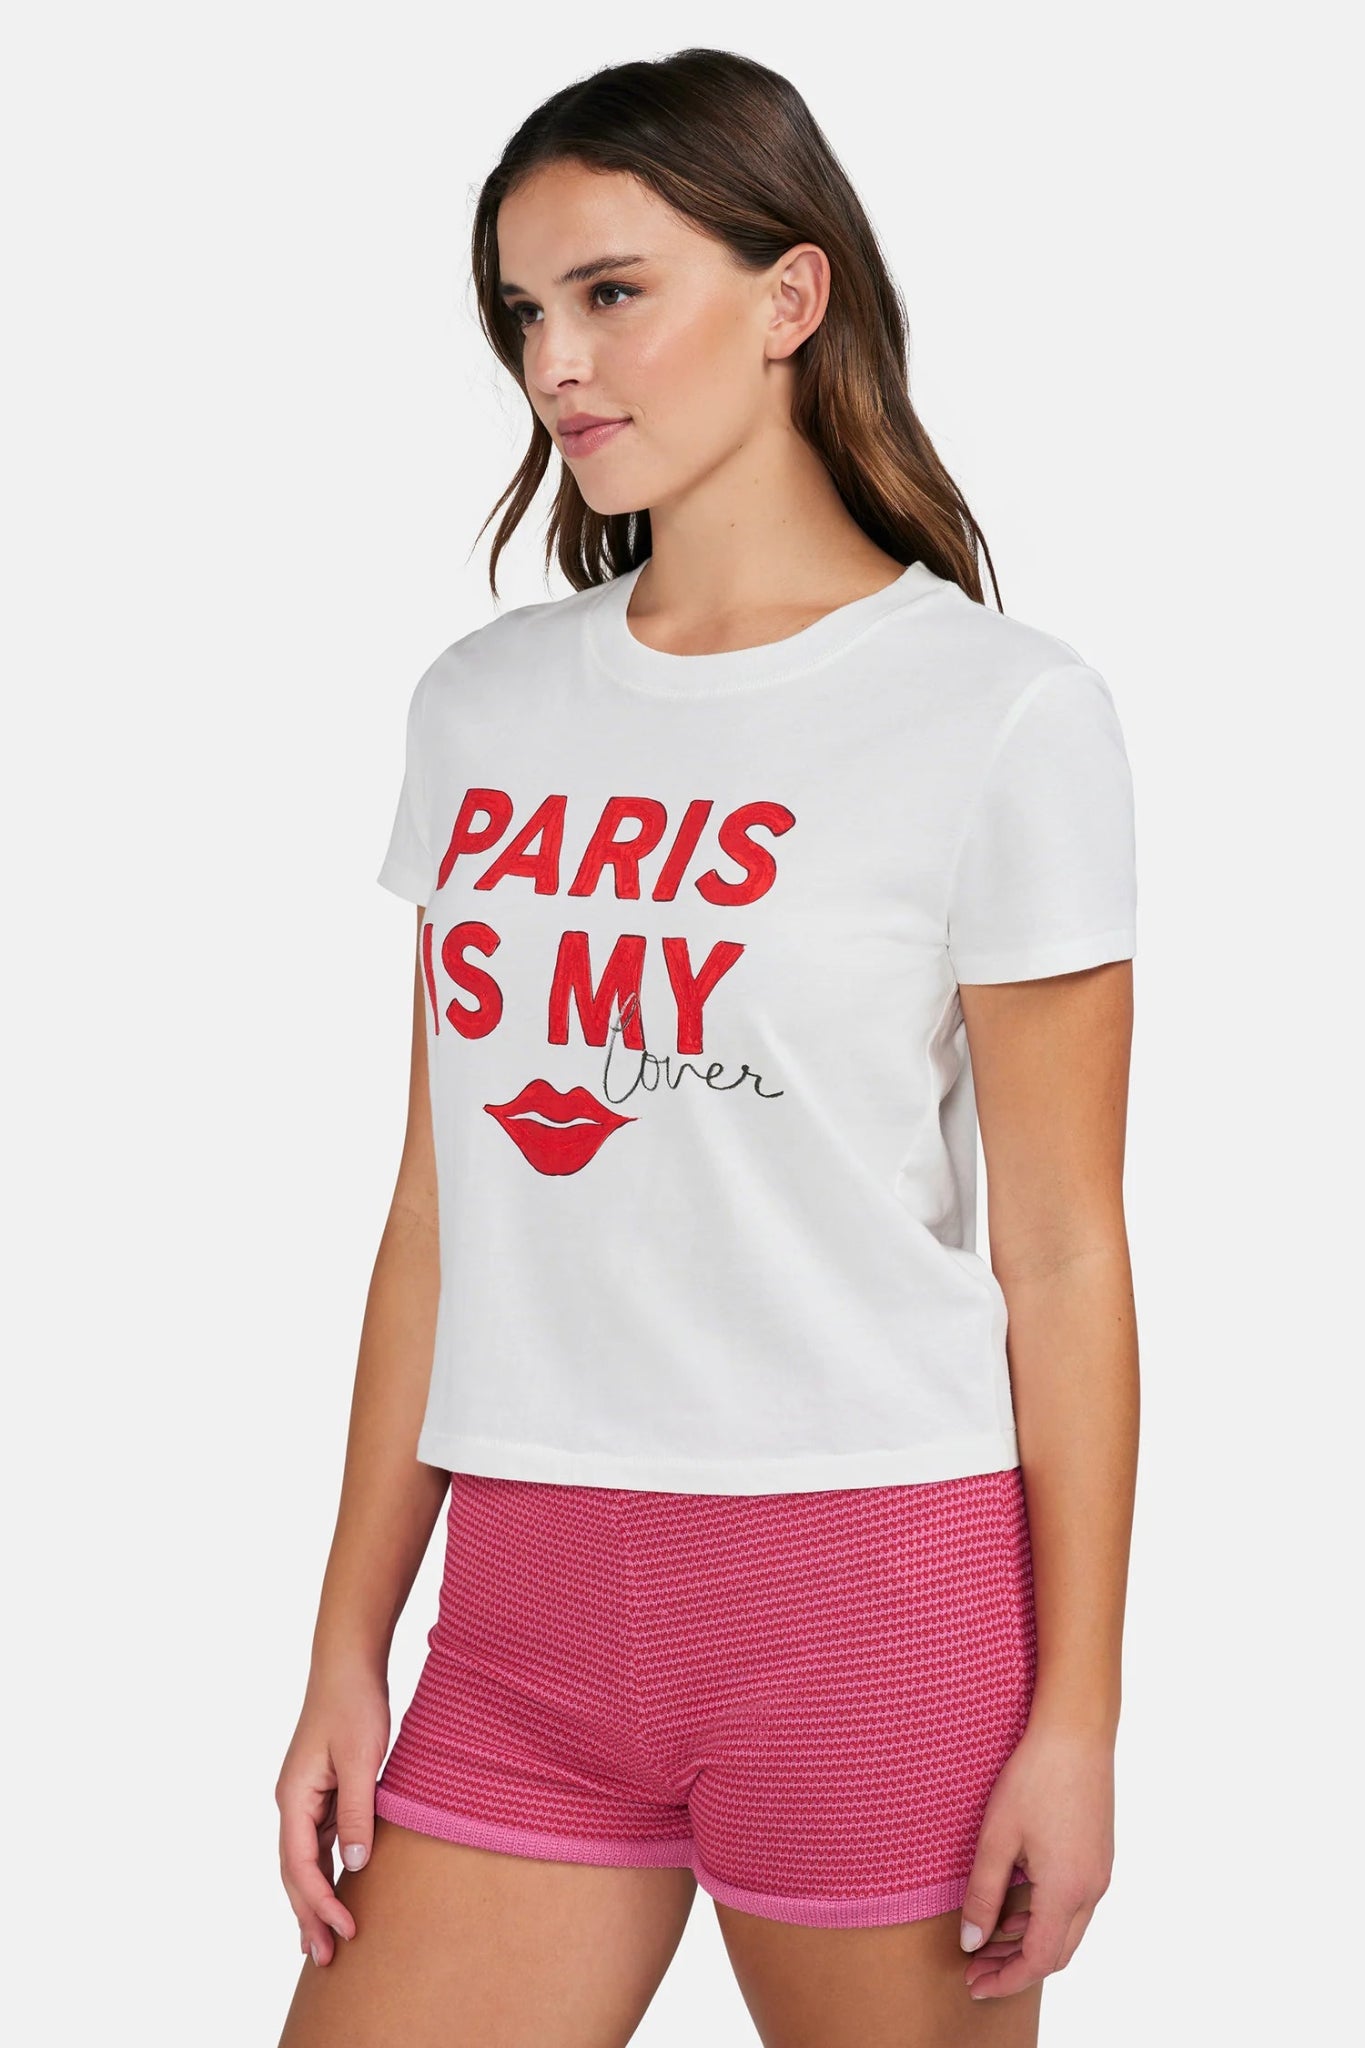 Shop Wildfox Paris Is My Lover Tee - Premium T-Shirt from Wildfox Online now at Spoiled Brat 